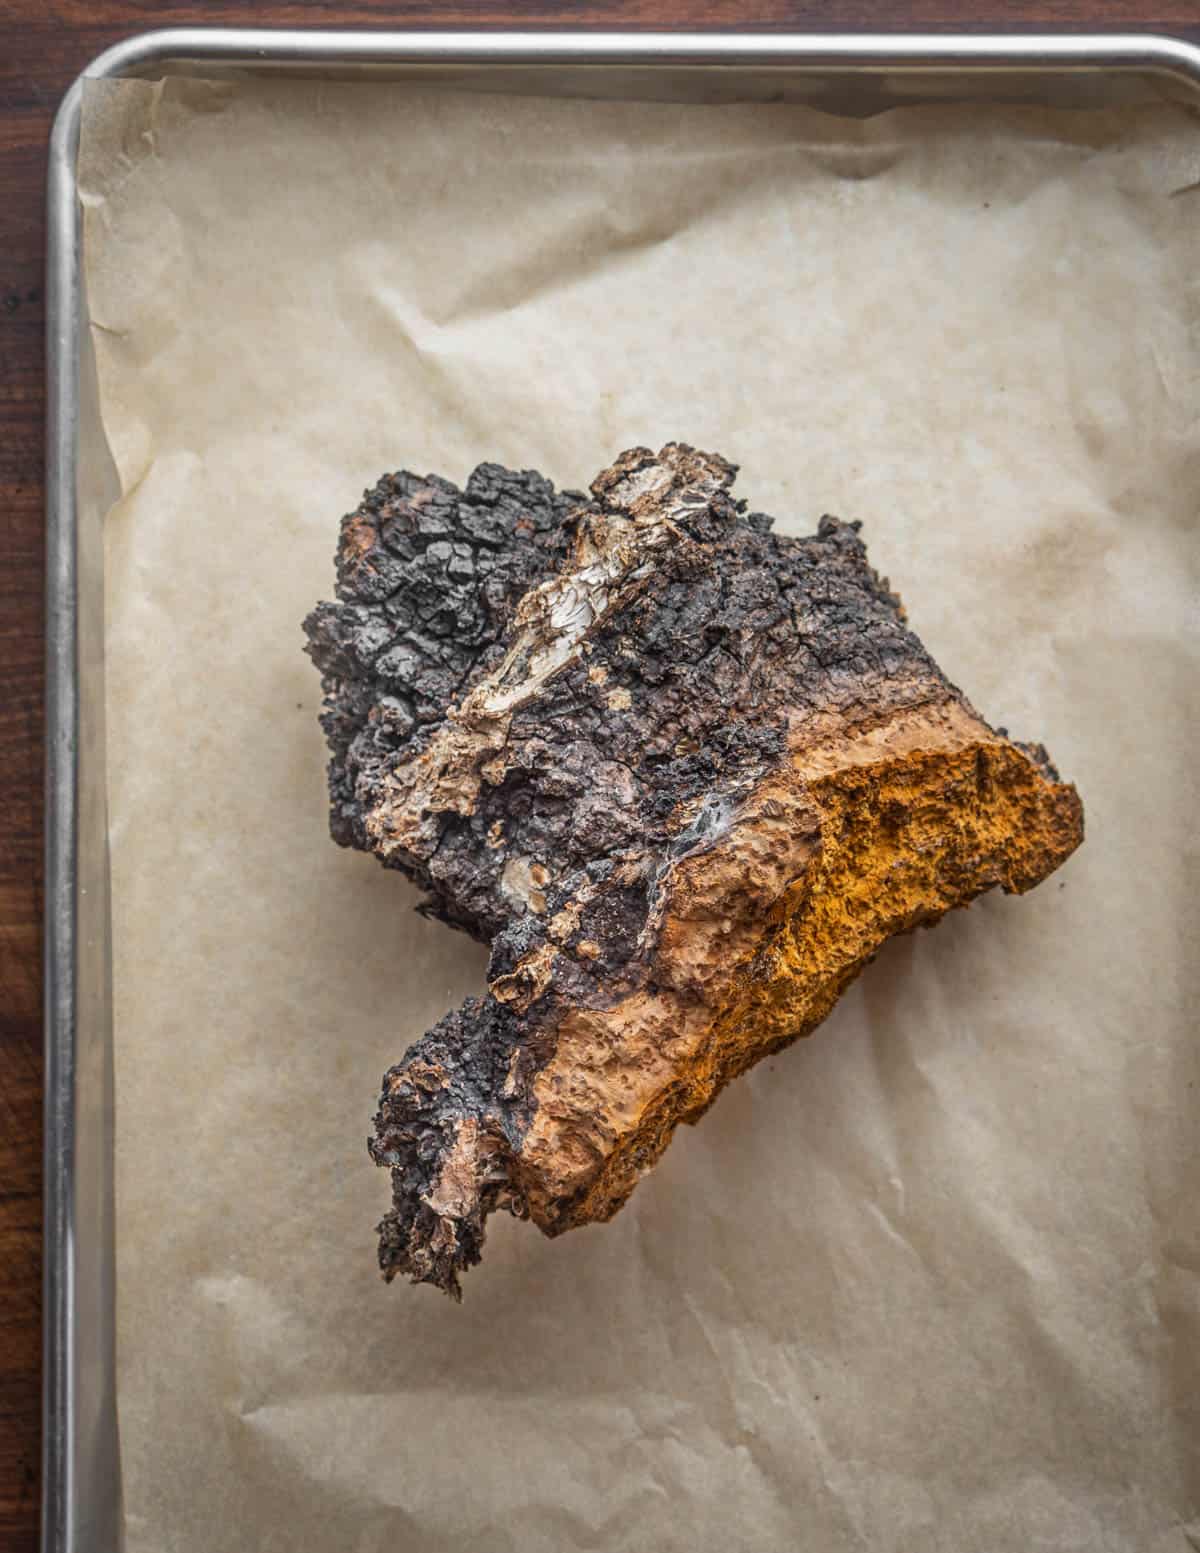 A whole fresh chaga mushroom laying on a baking sheet on a piece of parchment. 